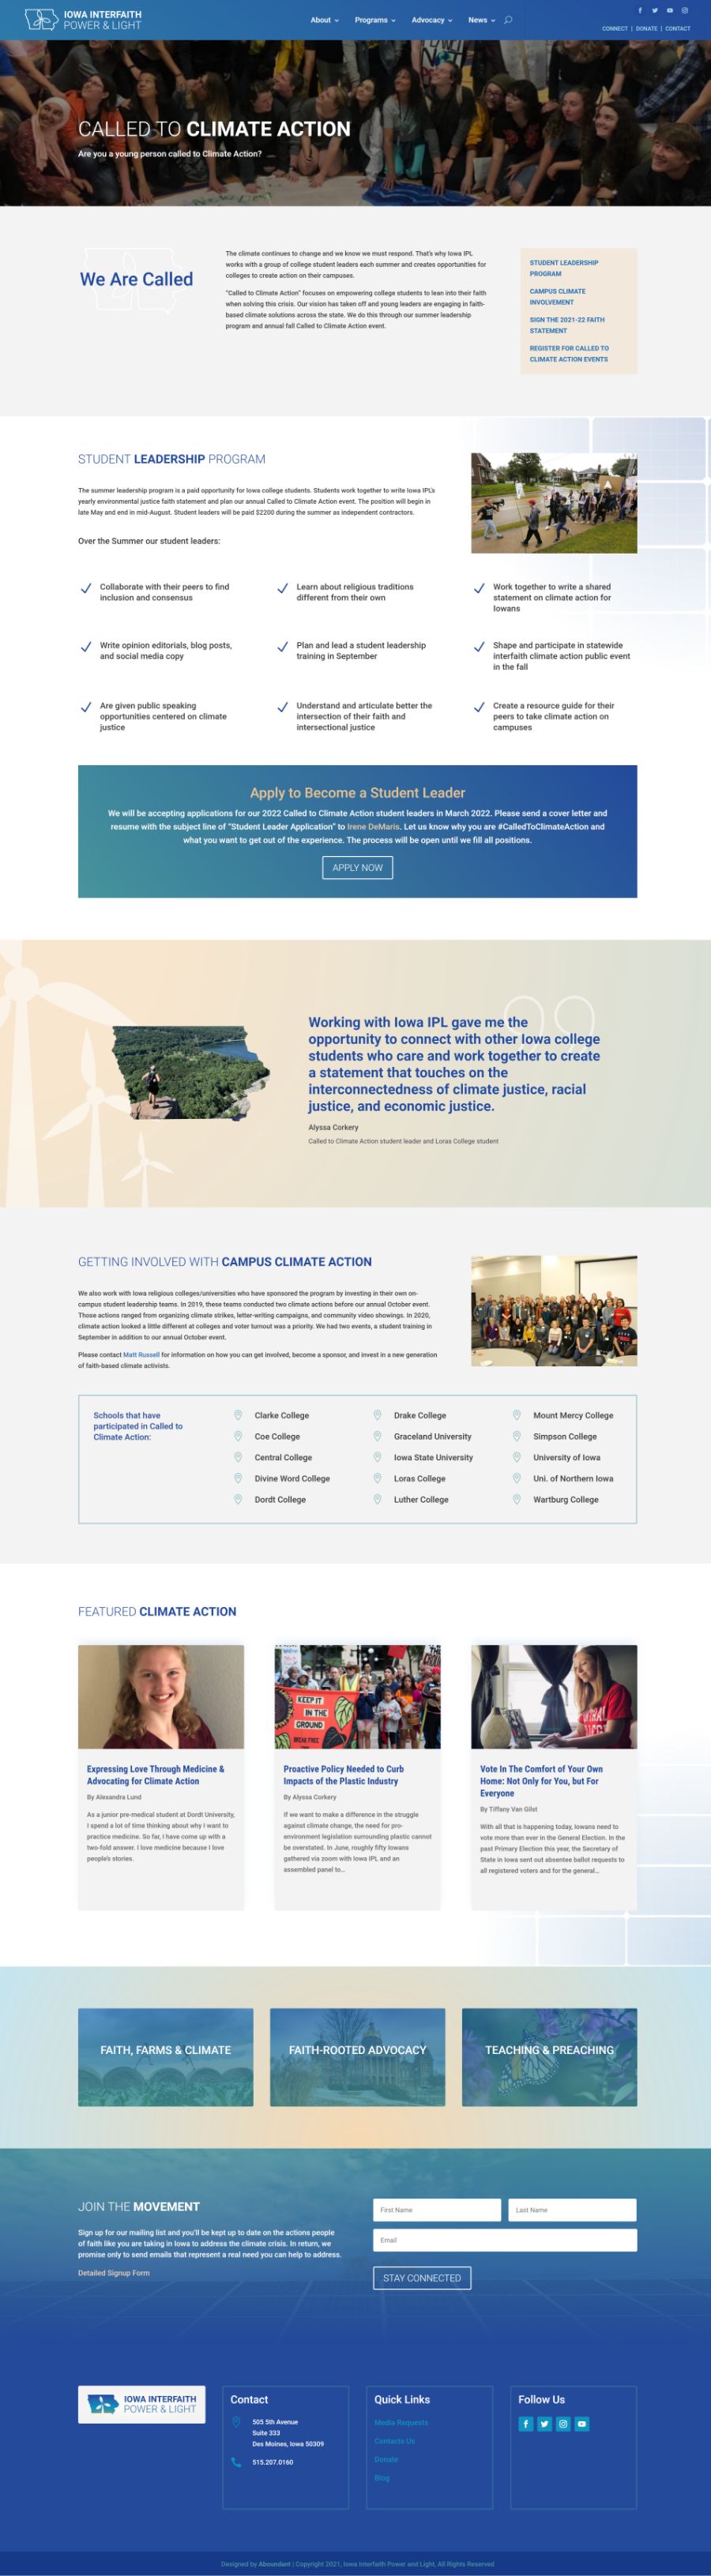 Called to Climate Action Page